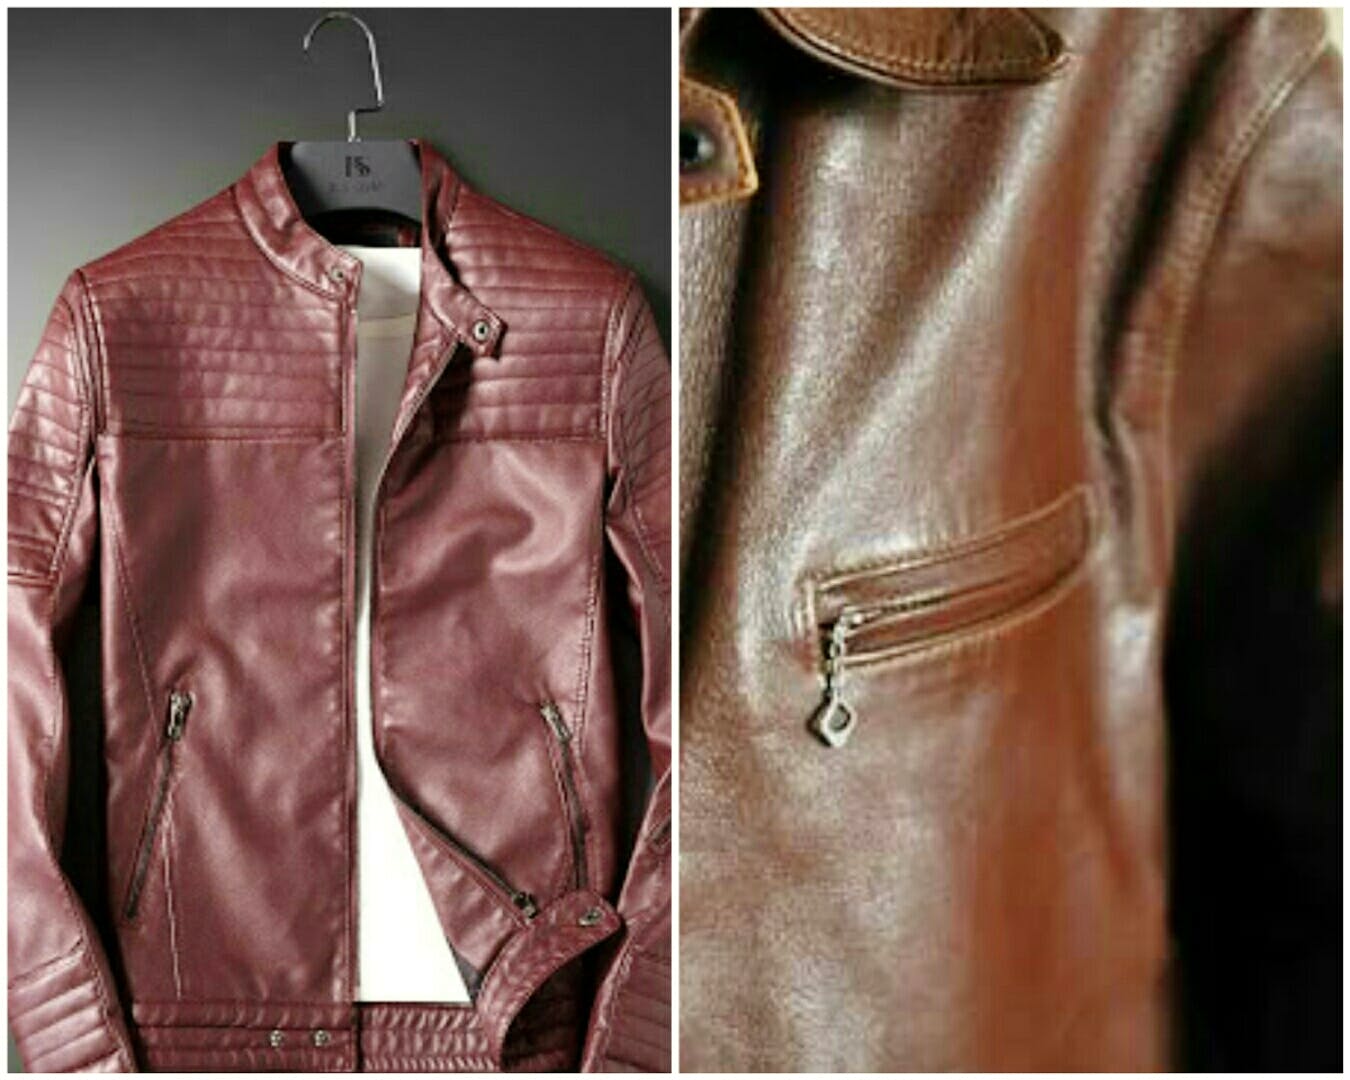 Clothing,Leather,Jacket,Leather jacket,Outerwear,Textile,Brown,Sleeve,Zipper,Collar